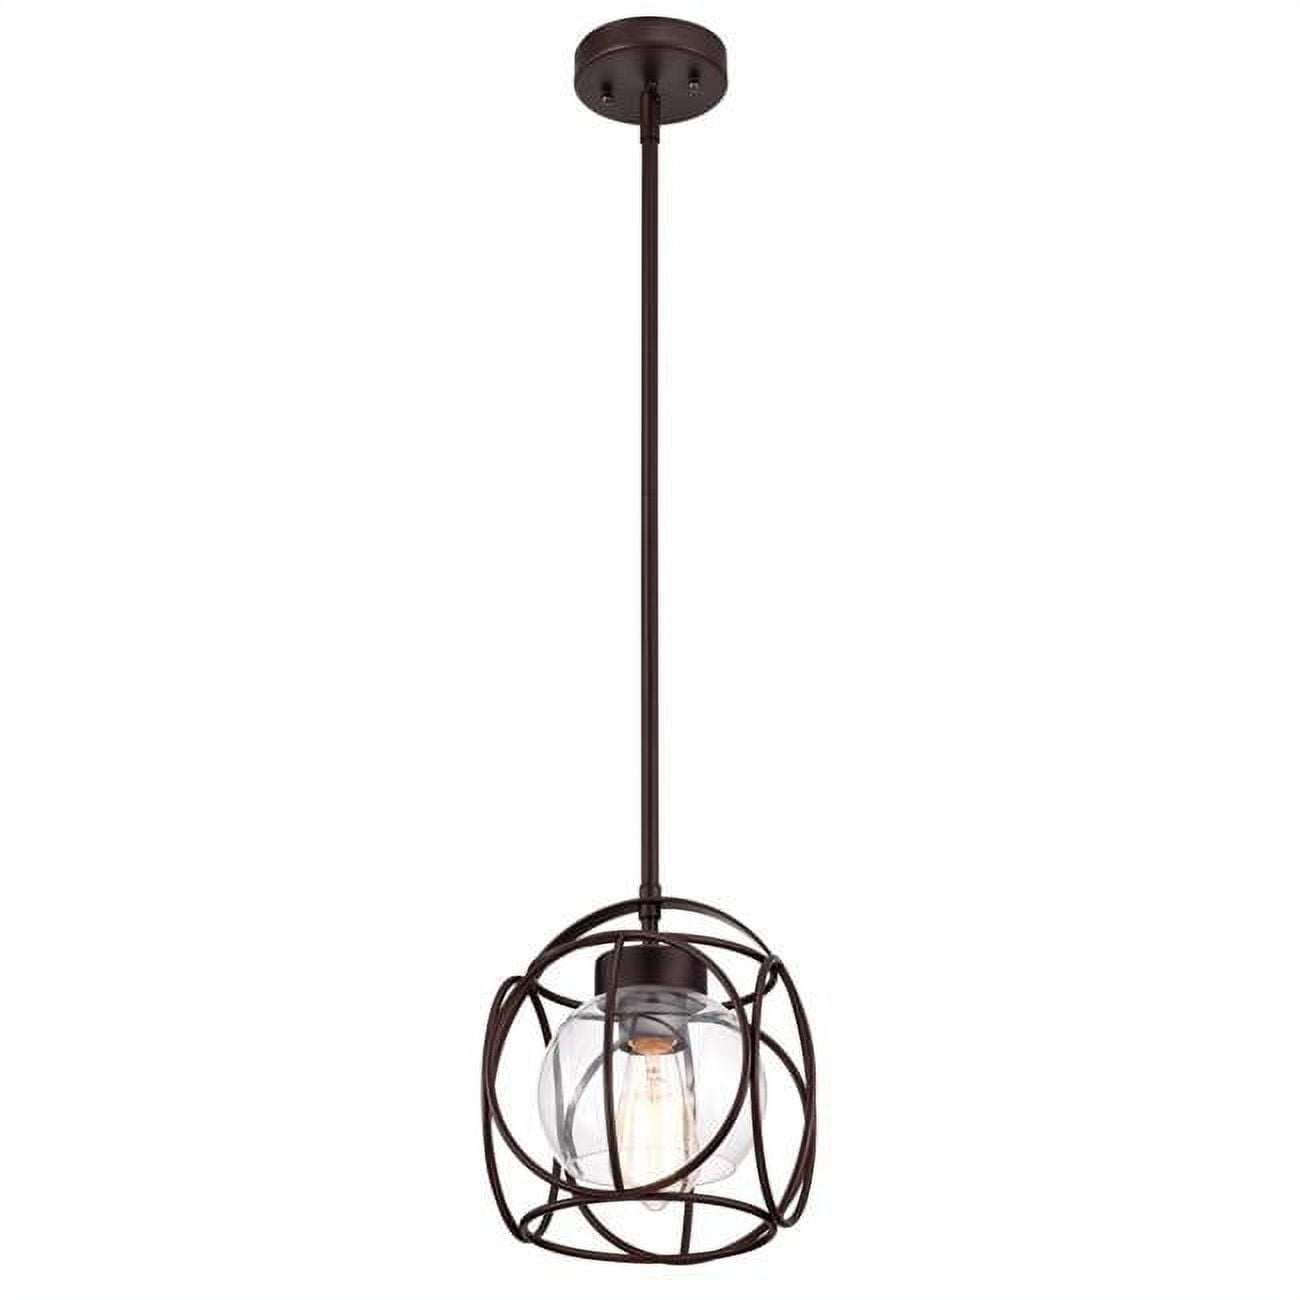 10 in. Rylee Transitional 1 Light Mini Pendant Ceiling Fixture, Oil Rubbed Bronze -  FeeltheGlow, FE2824061